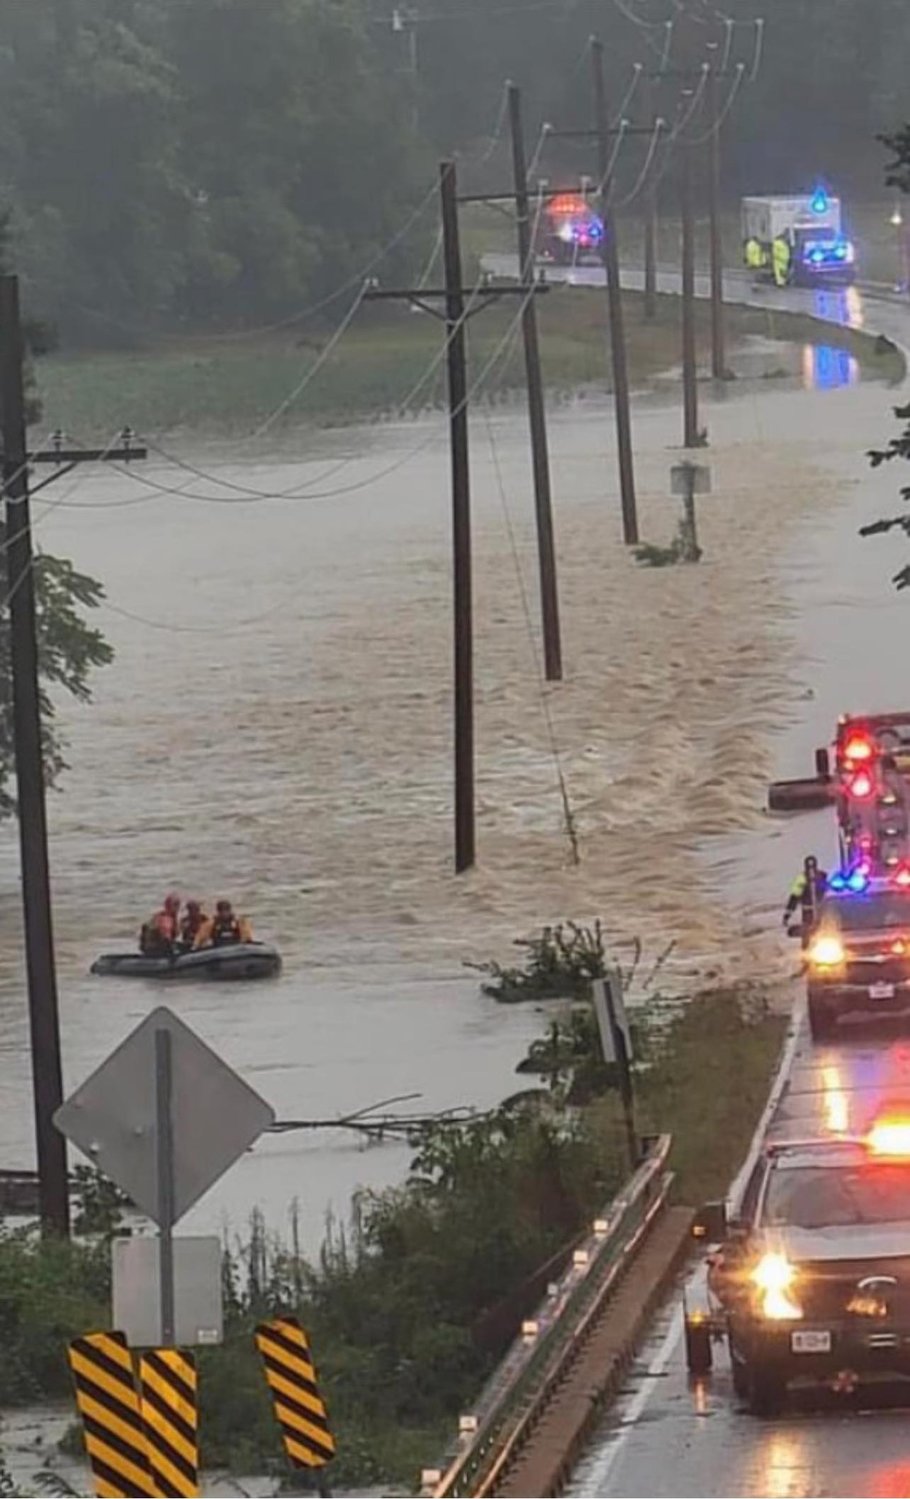 Firefighters maneuver a rescue boat through rapid floodwater that has overtaken Highway J north of Wright City on Tuesday, July 26.